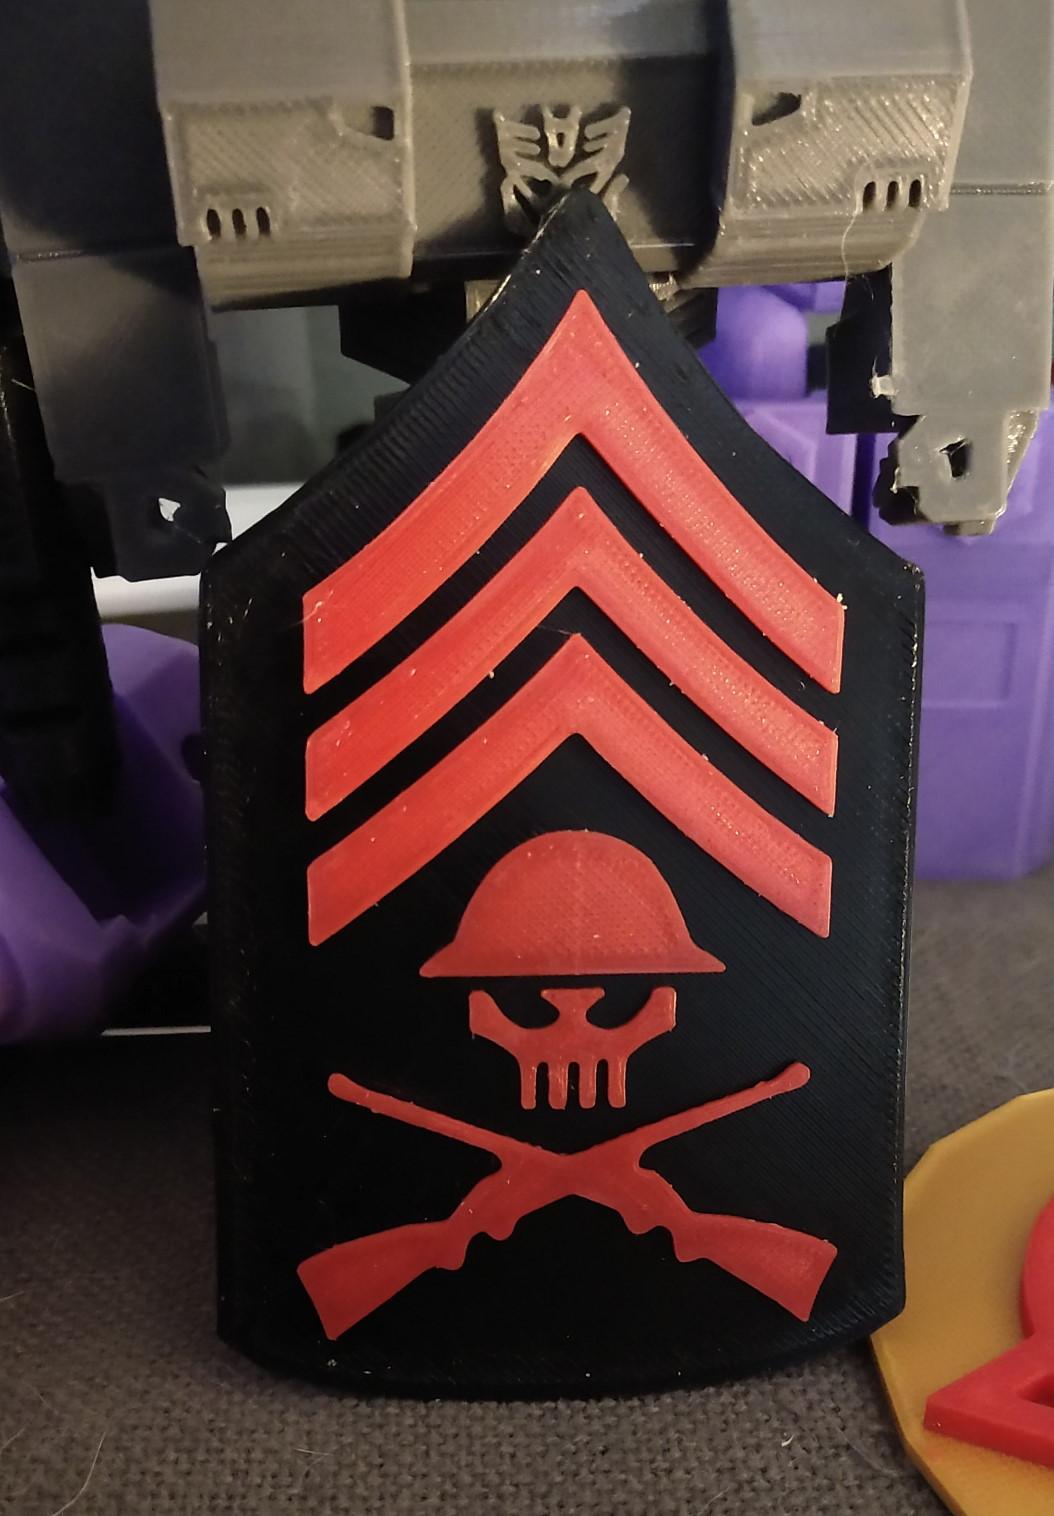 Sgt Hatred logo badge from The Venture Bros 3d model